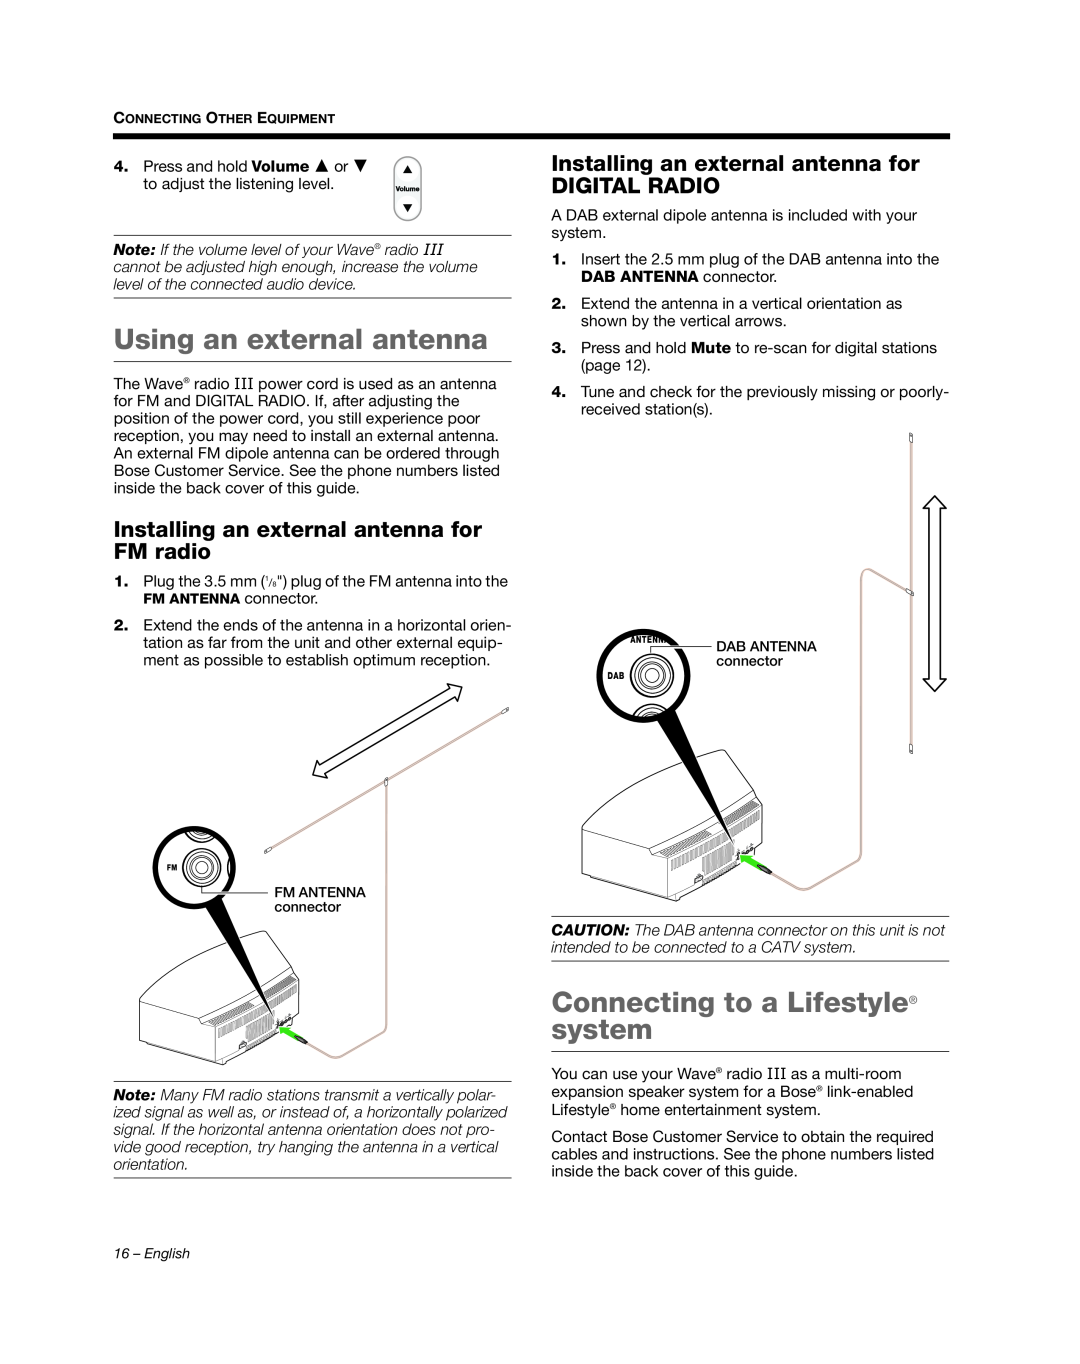 Bose III manual Using an external antenna, Connecting to a Lifestyle system, Installing an external antenna for FM radio 